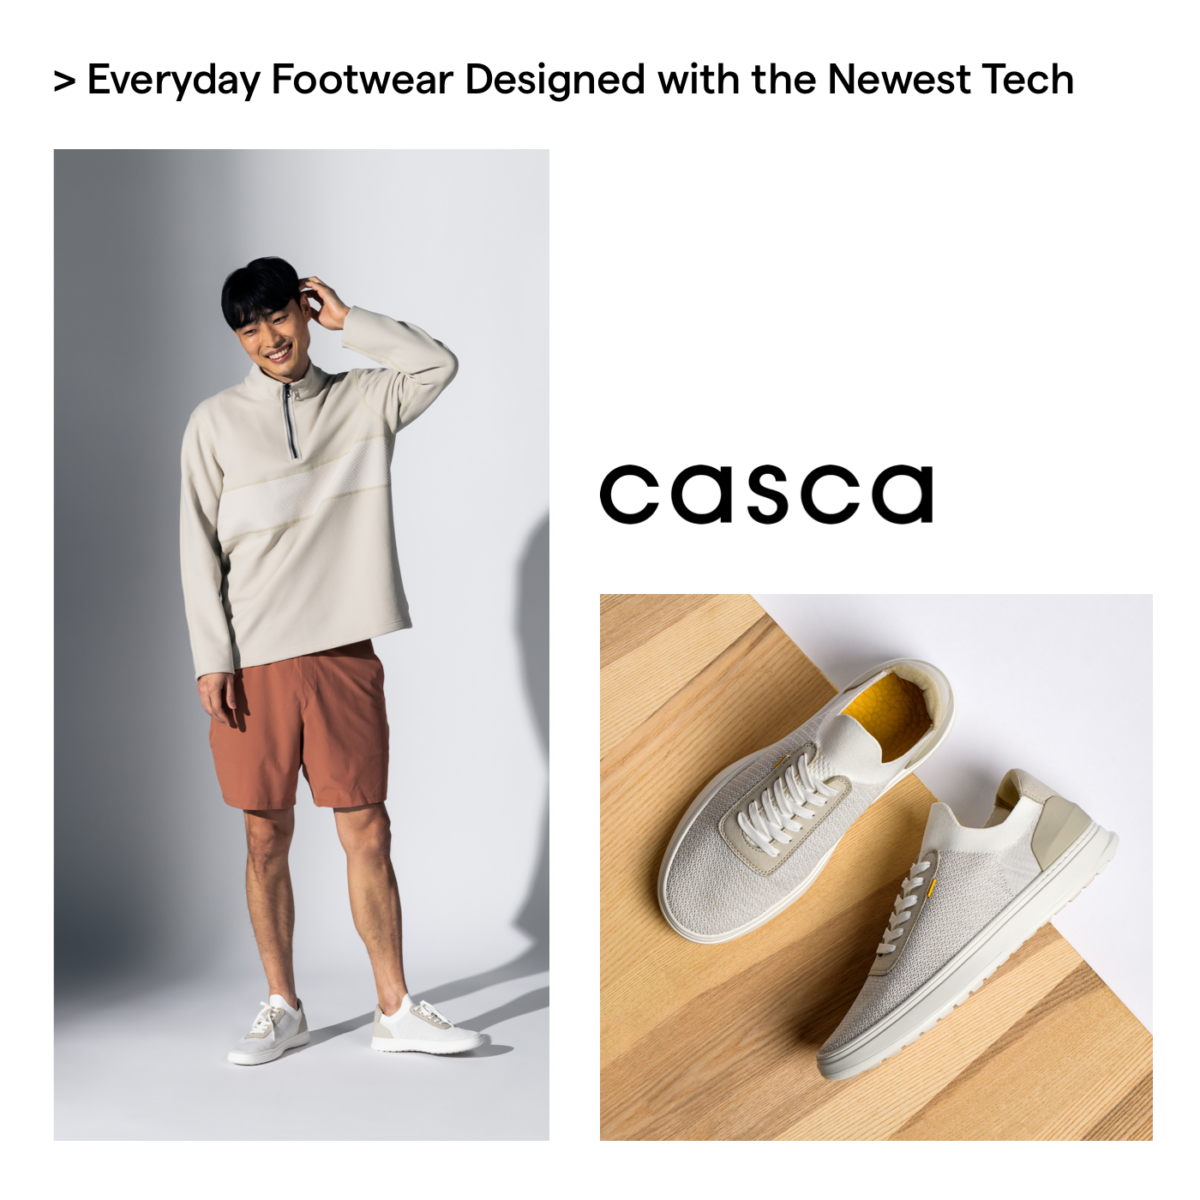 Casca shoes design forward father's day gift guide